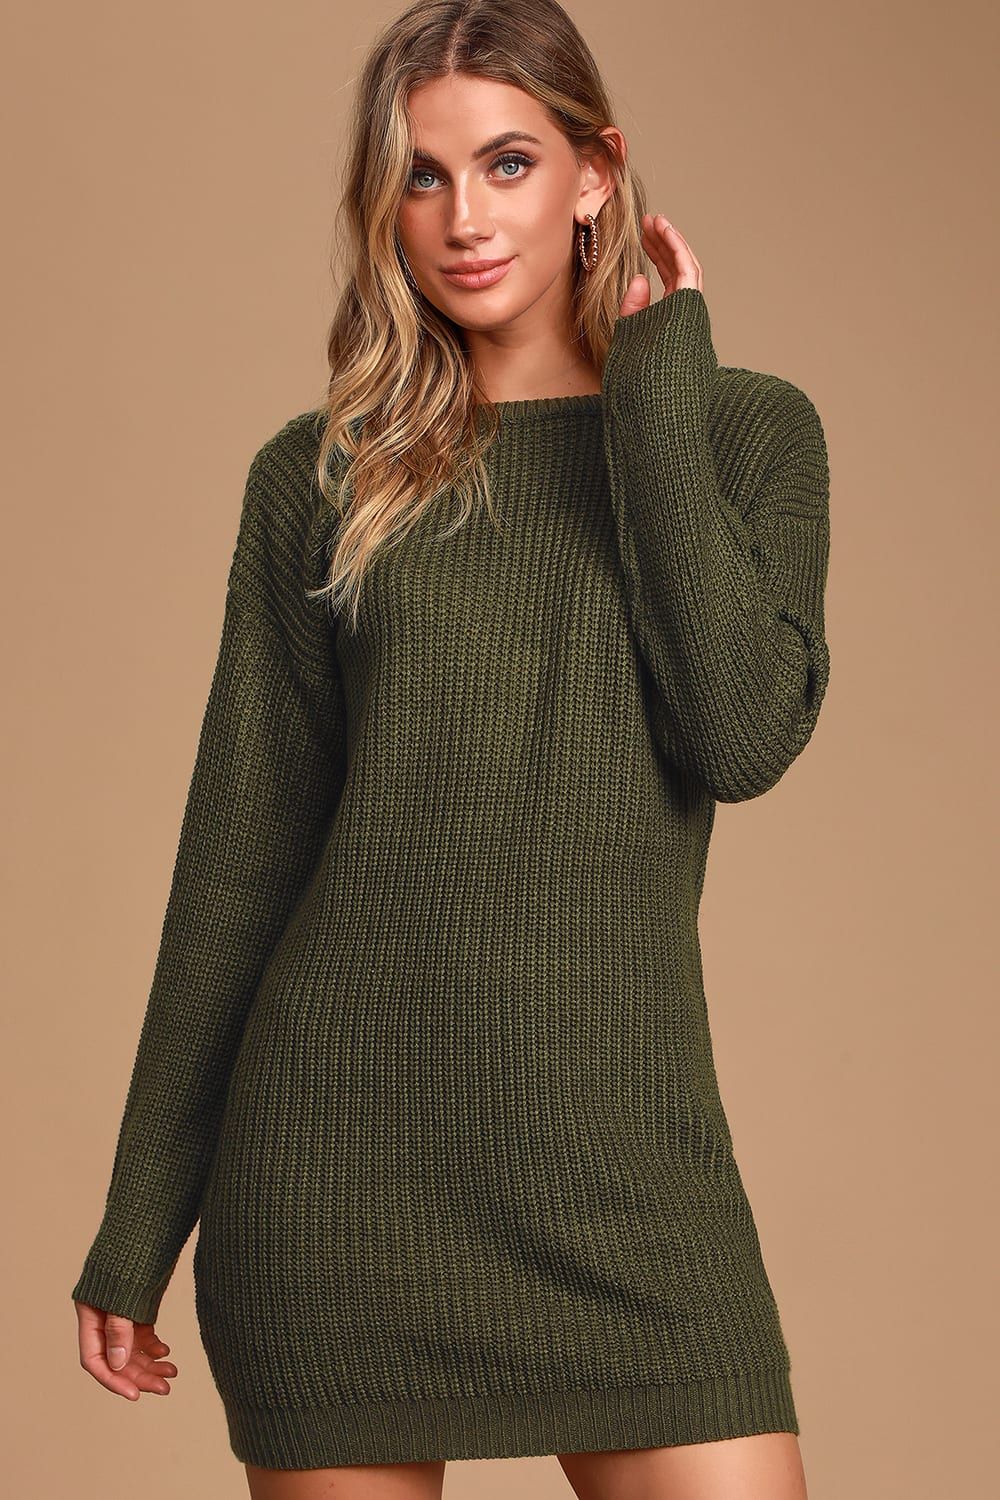 Bringing Sexy Back Olive Green Backless Sweater Dress | Lulus (US)